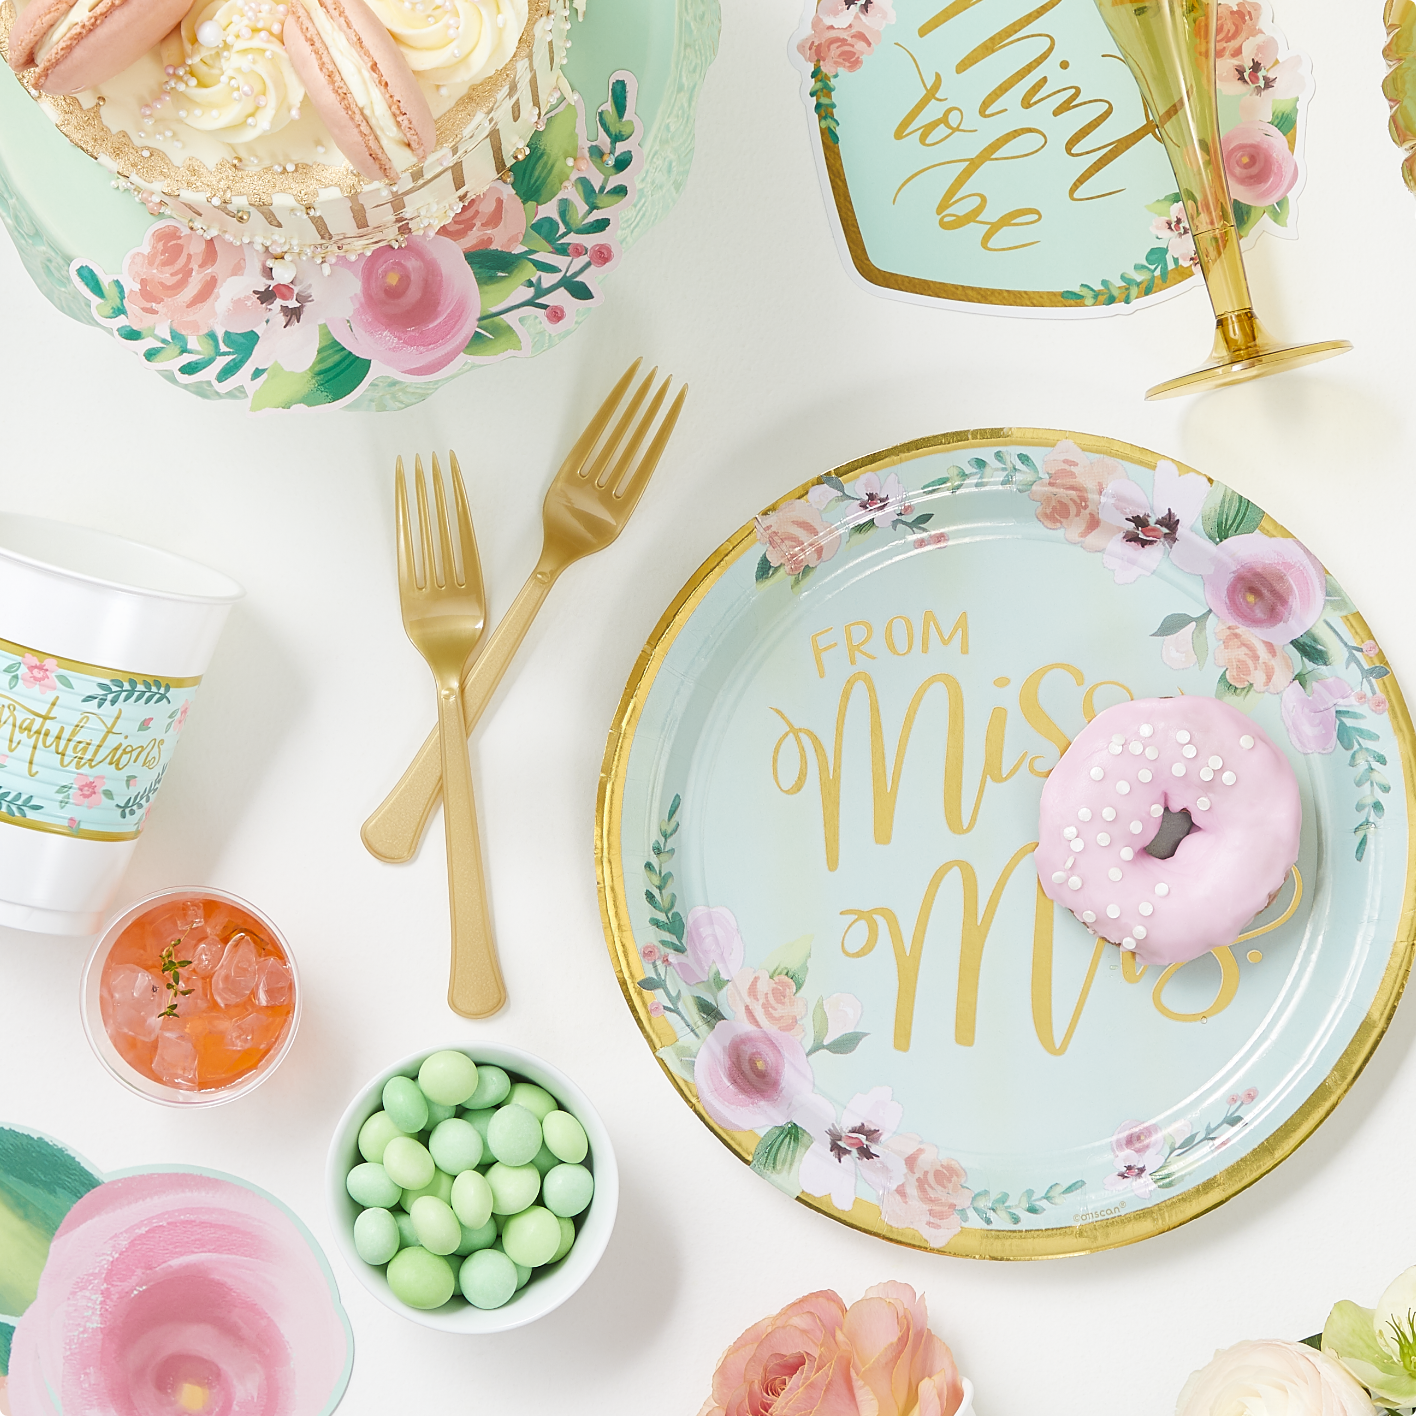 A round paper plate featuring pink flowers and a gold border and a "From Miss to Mrs" headline, gold cutlery and cups and an assortment of pink and mint dessert on a white backdrop.